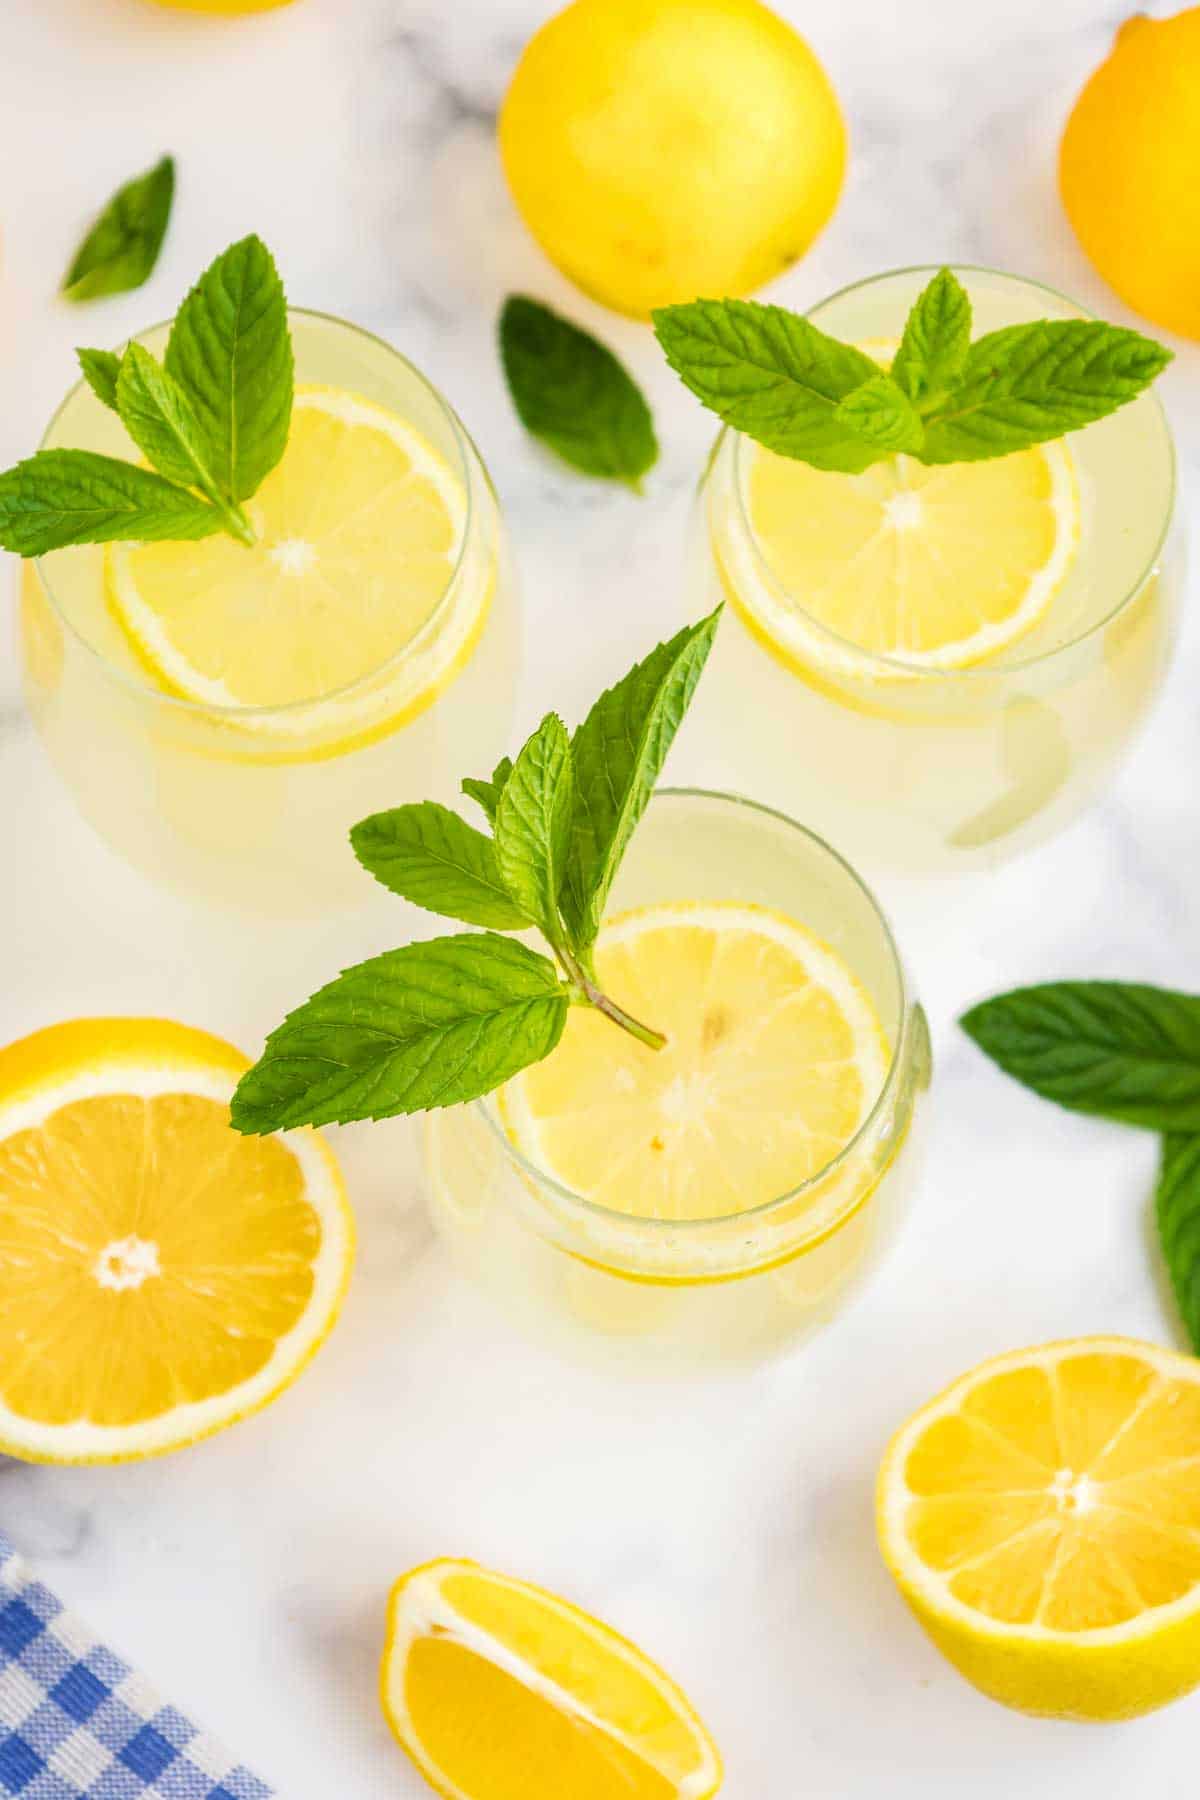 Three glasses of lemonade garnished with lemon slices and mint leaves on a marble surface, with whole and sliced lemons nearby.